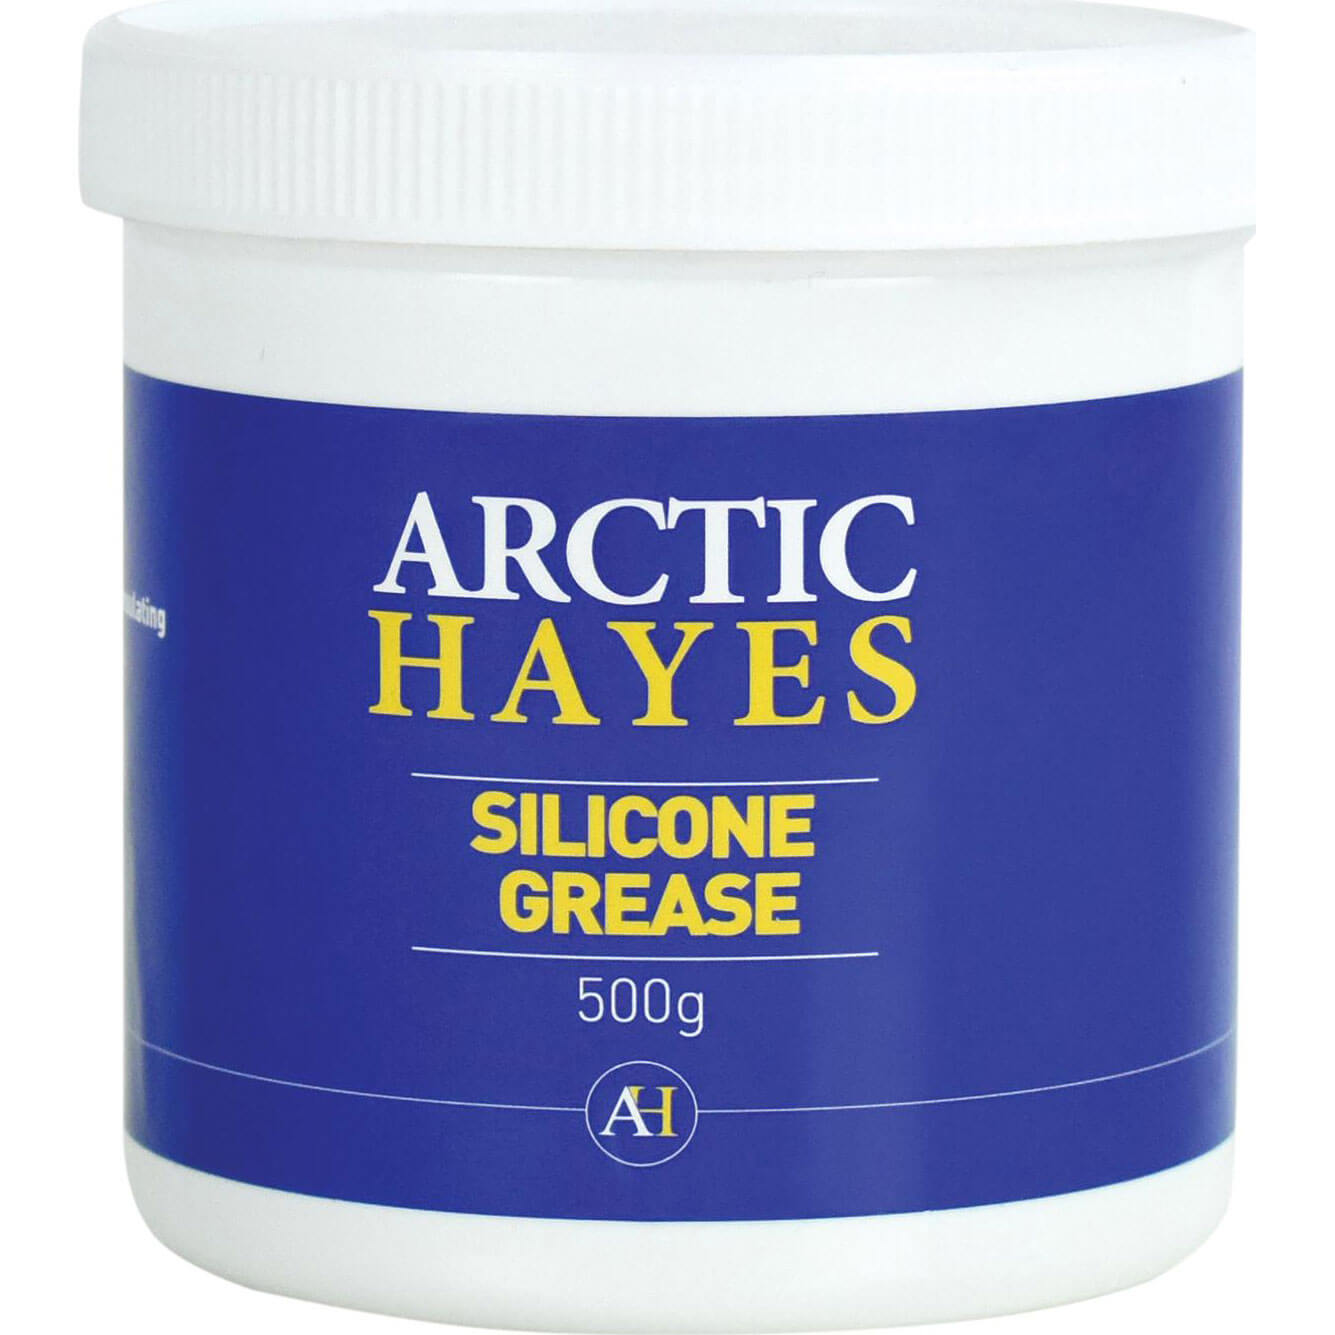 Image of Arctic Hayes Silicone Grease 500g